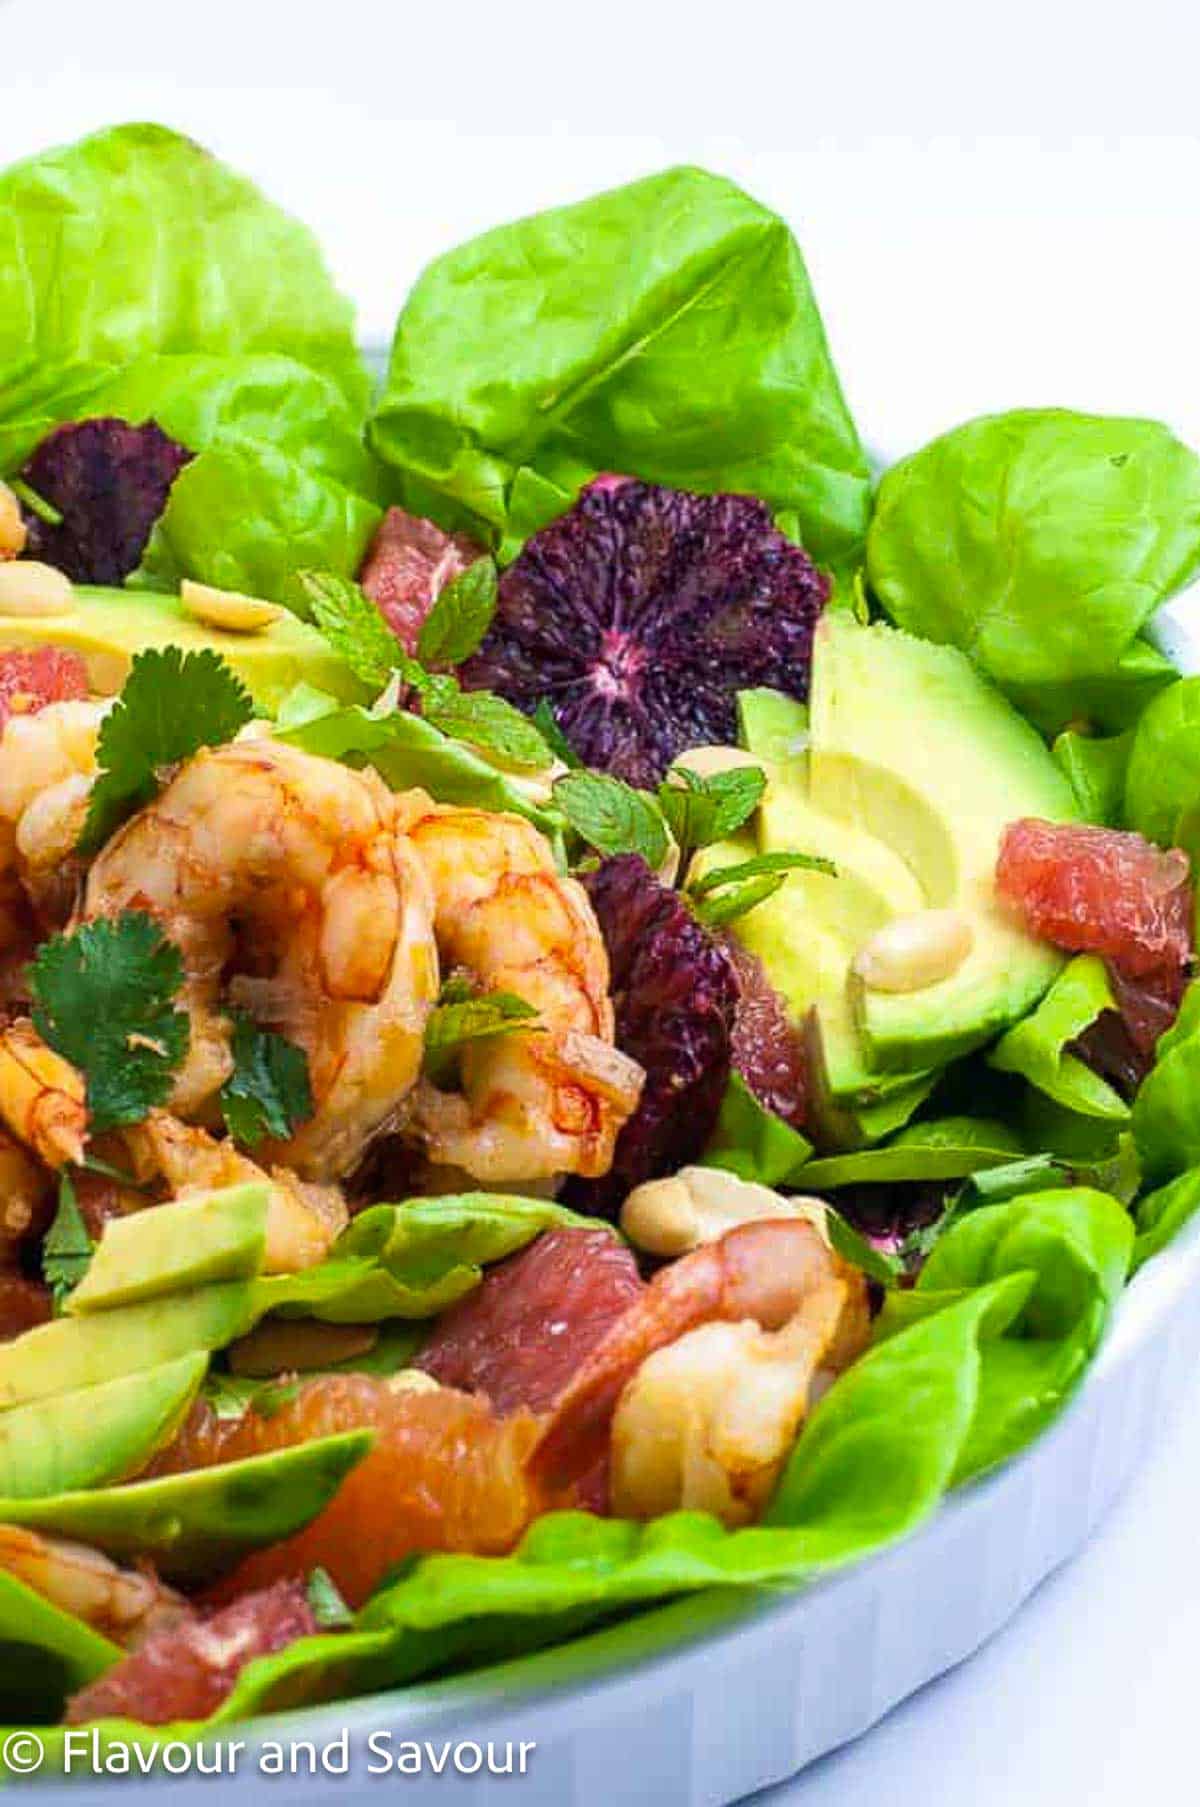 A salad made with Thai-marinated shrimp, grapefruit, blood oranges, avocado and mint leaves.